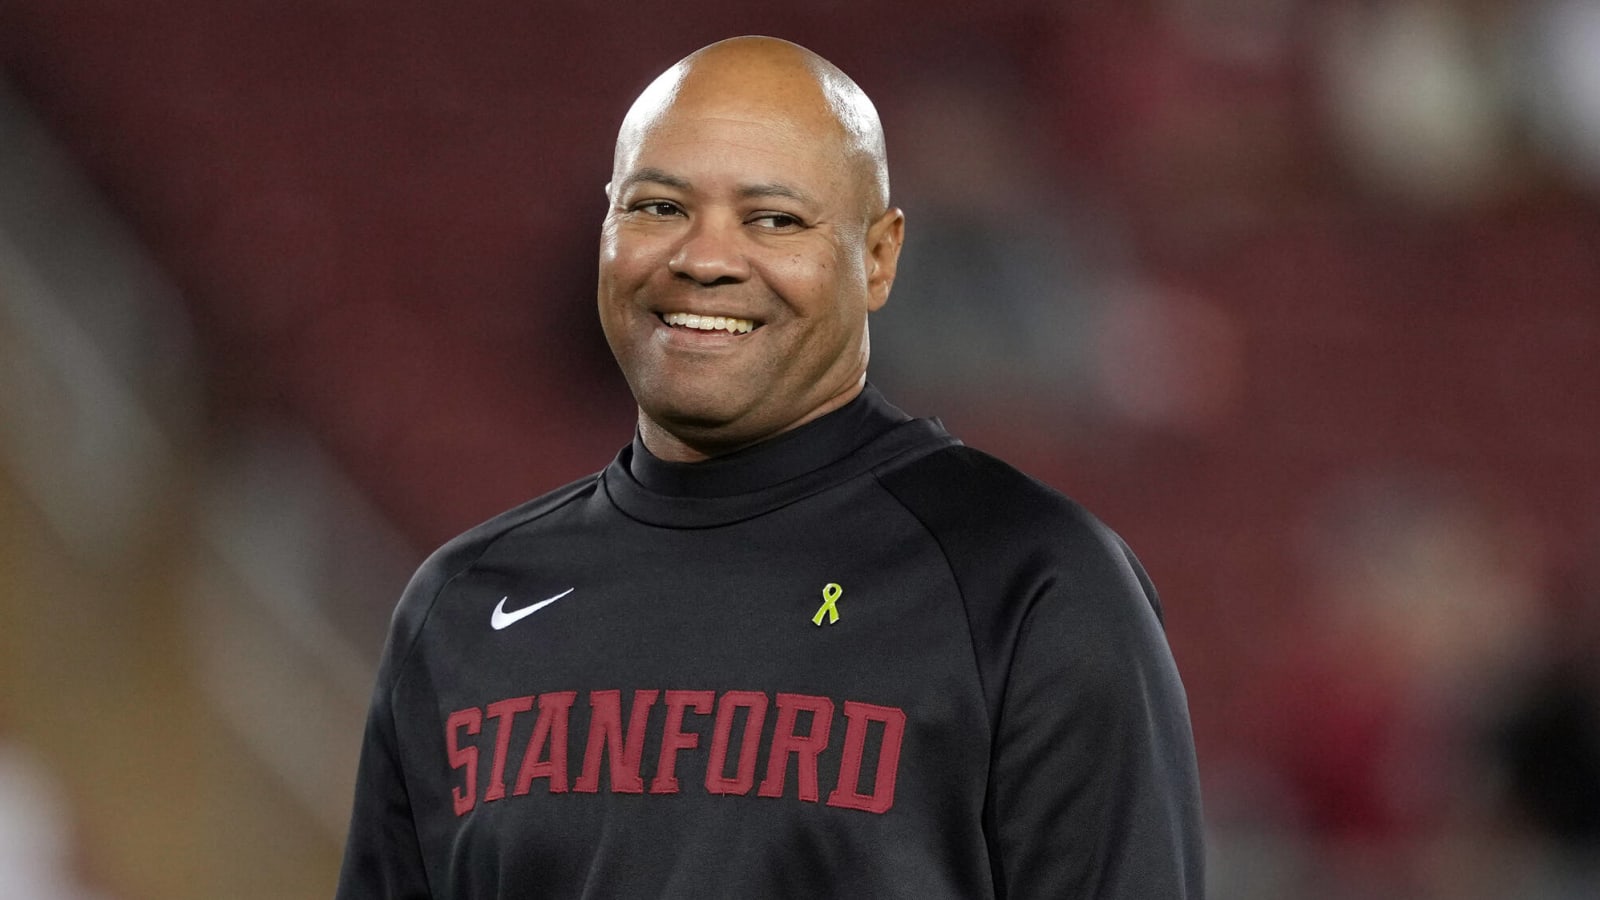 Former Stanford leader to interview for Titans HC job